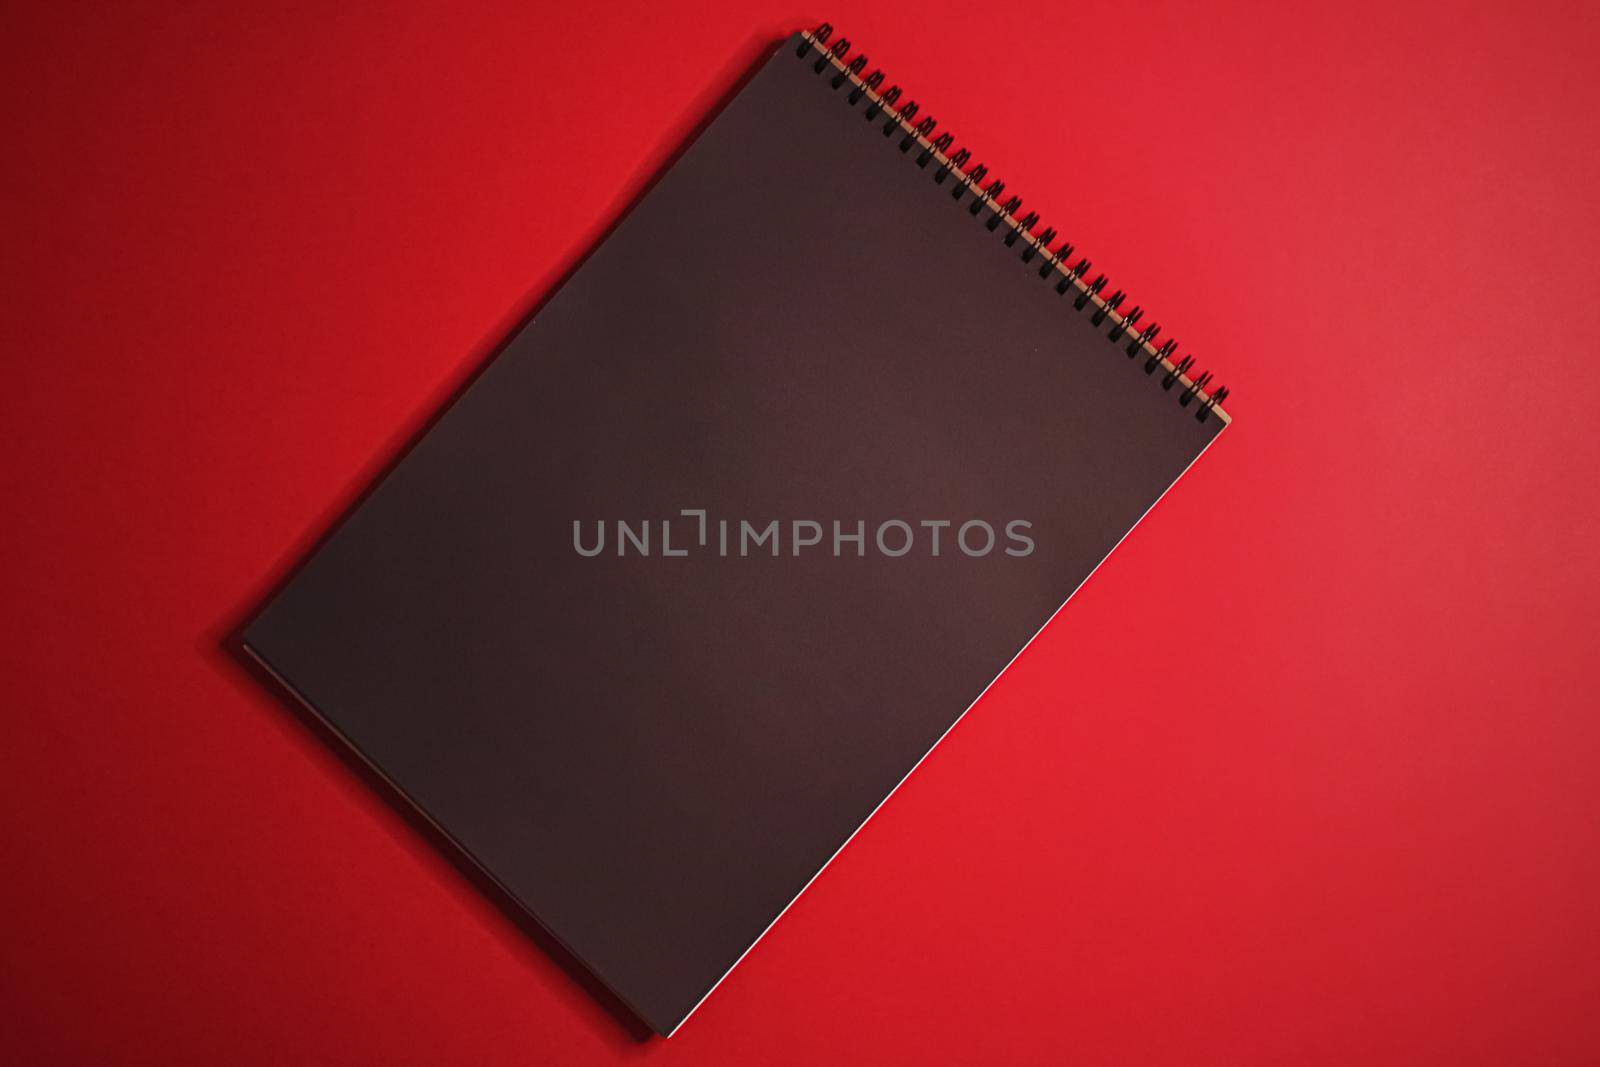 Black notebook on red background as office stationery flatlay, luxury branding flat lay and brand identity design for mockups